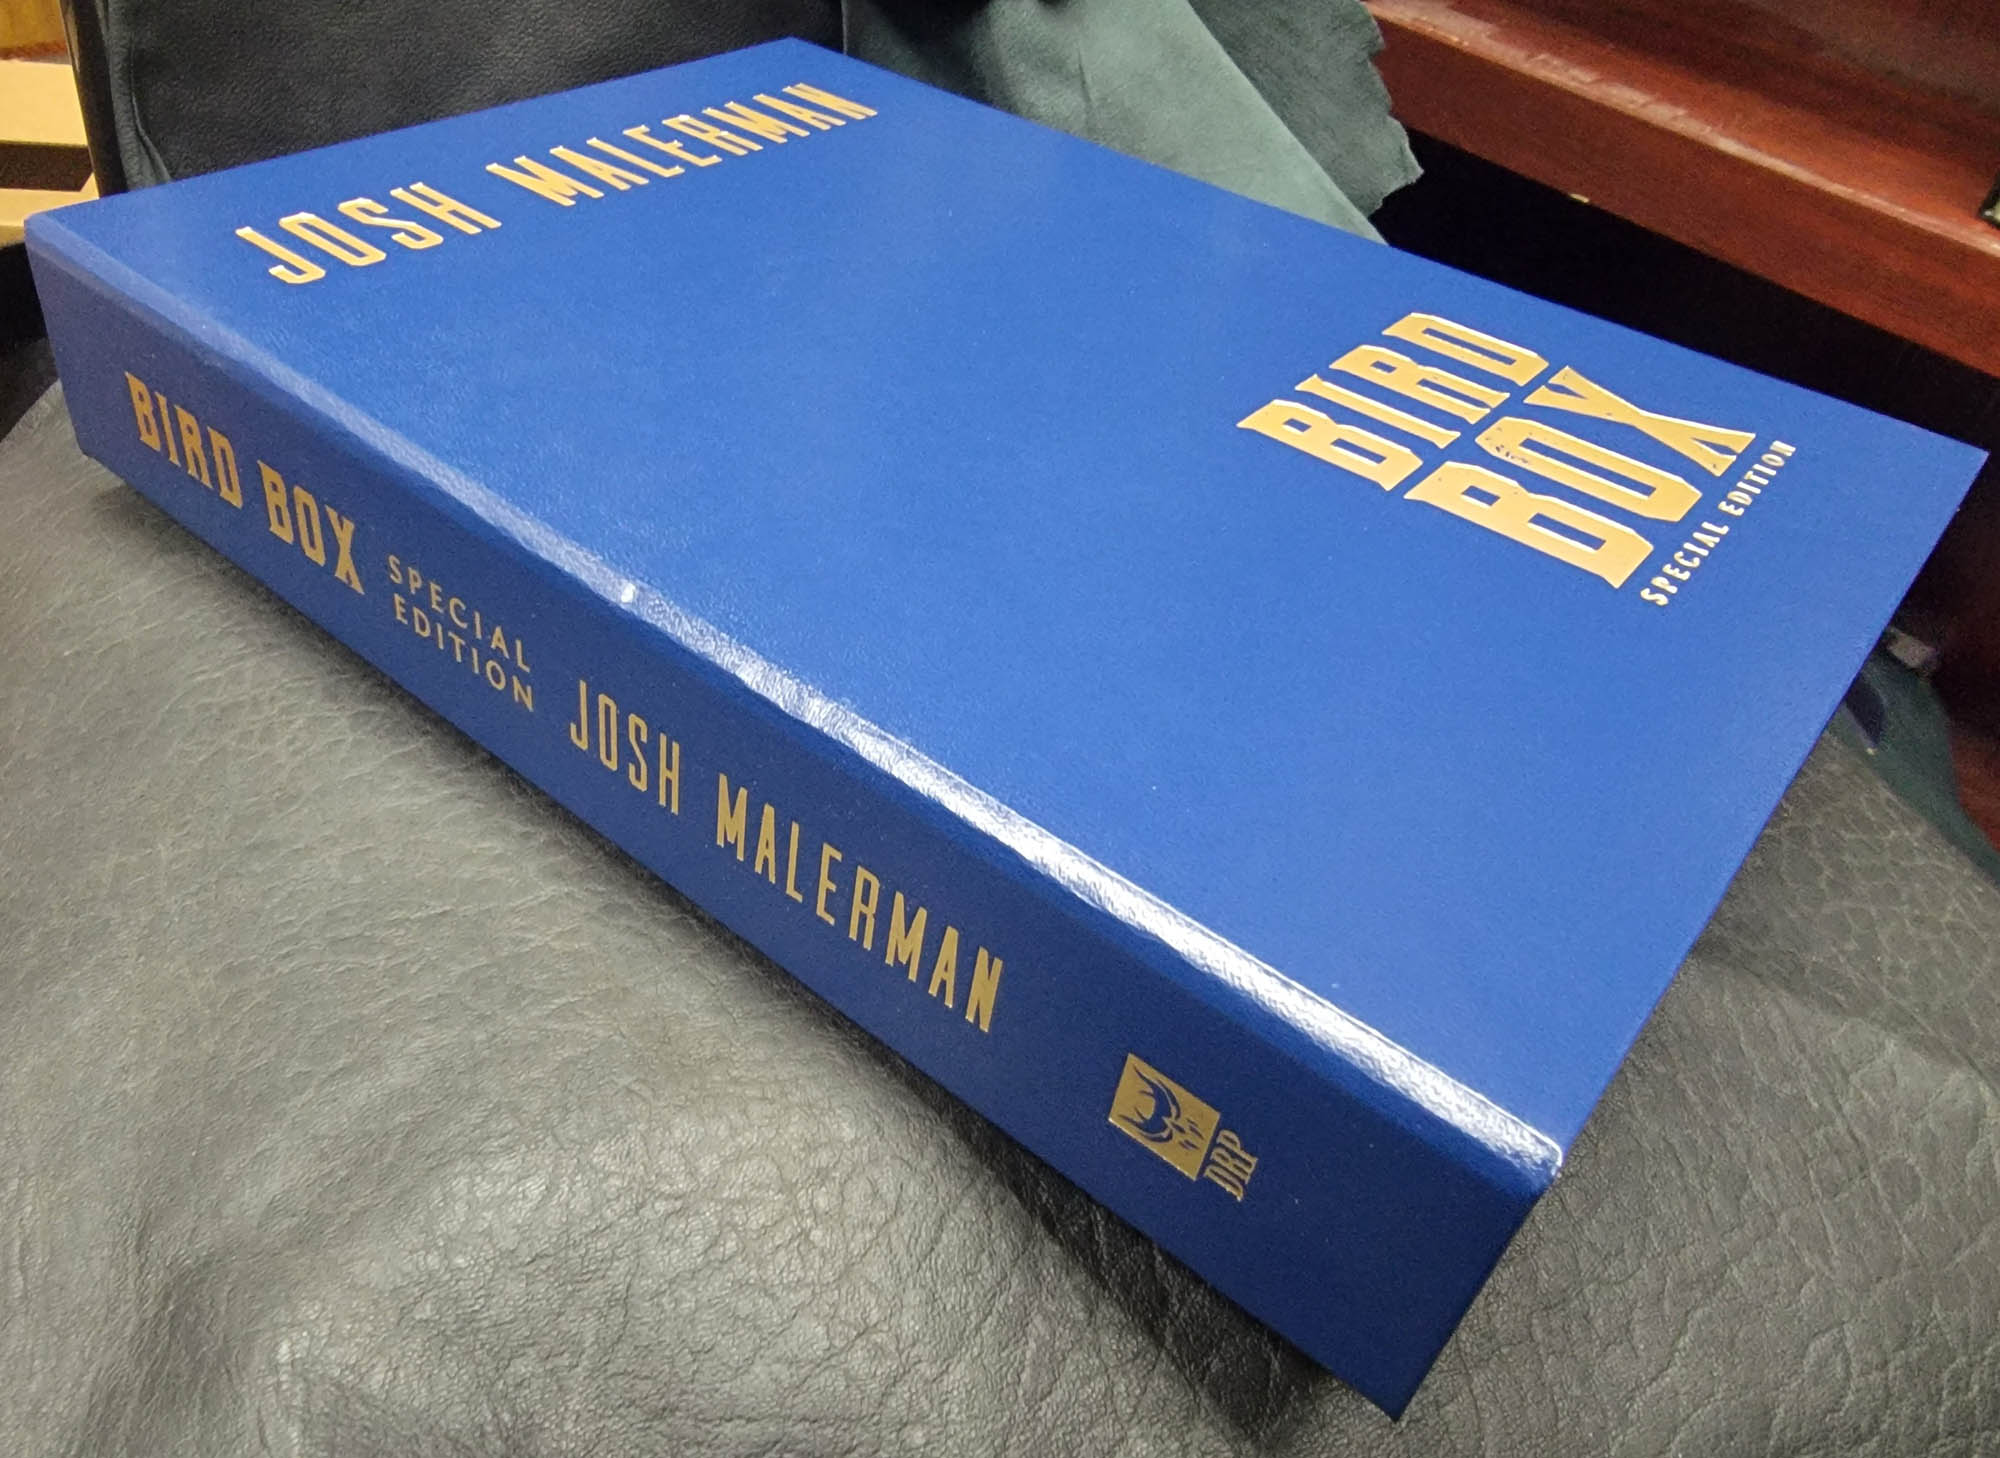 Bird Box Special Edition by Josh Malerman Deluxe Signed PC Traycased Hardcover